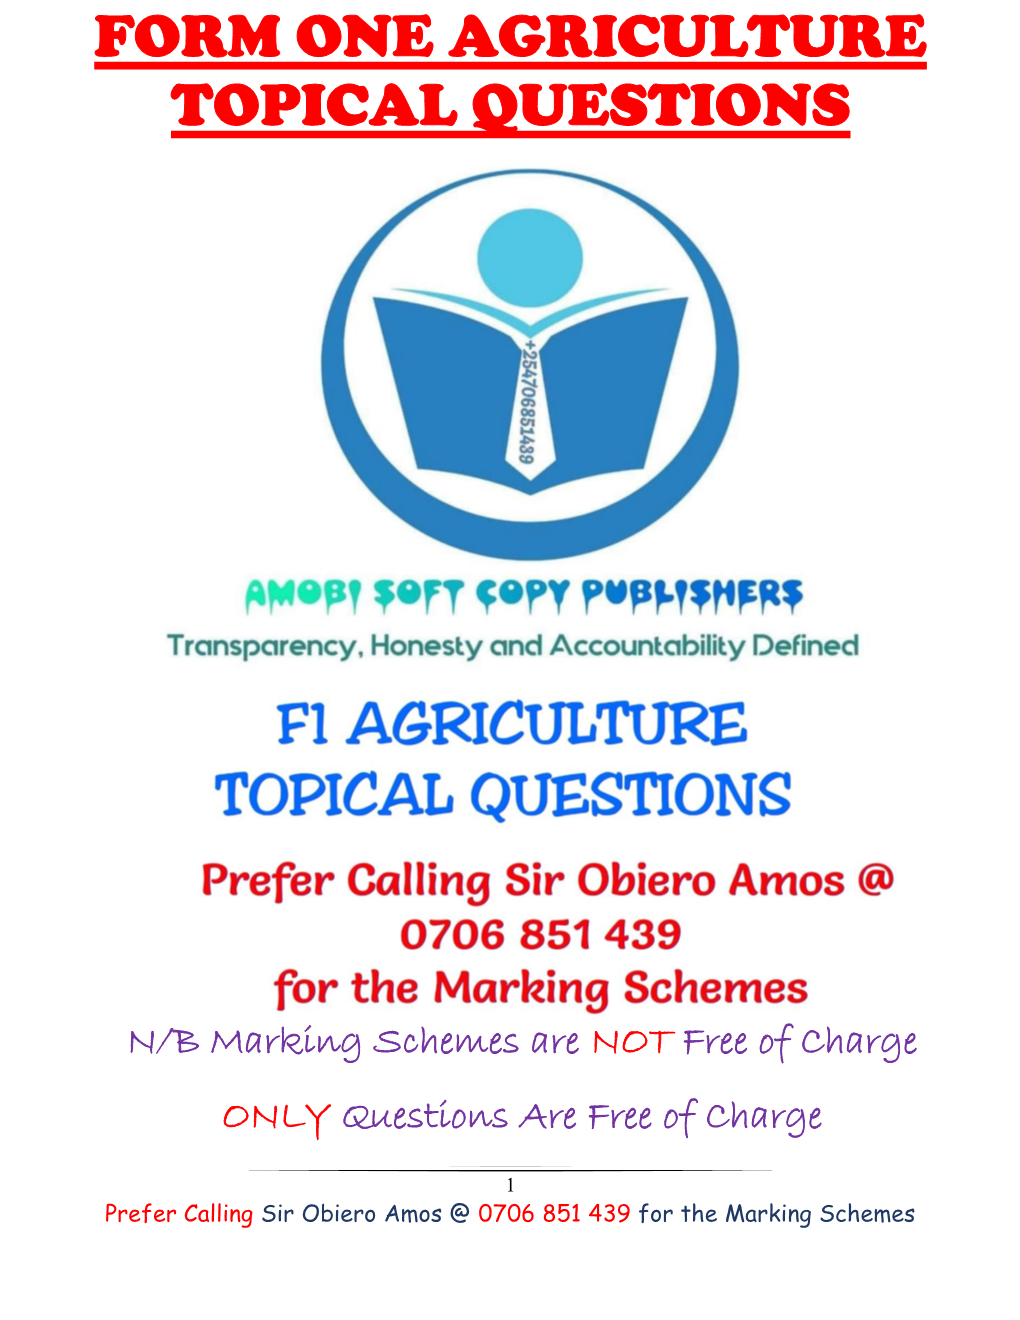 Form One Agriculture Topical Questions